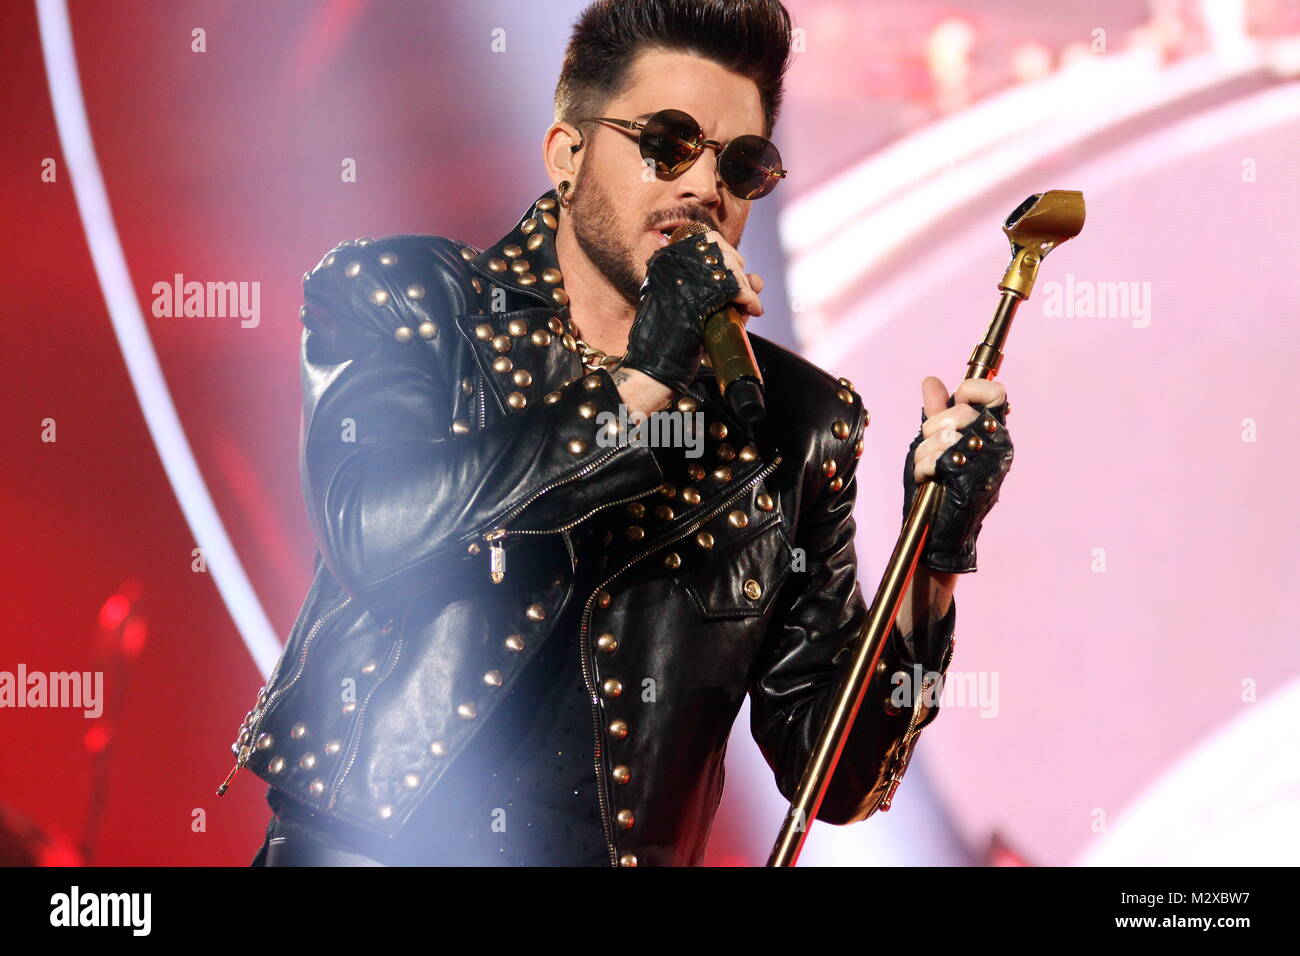 Frankfurt, Germany. 7th Feb, 2015. Queen + Adam Lambert, collaboration between the active members of the British rock band Queen (Brian May and Roger Taylor) and American vocalist Adam Lambert. Concert at Festhalle Frankfurt, Germany. Here: Adam Lambert. Credit: Christian Lademann Stock Photo